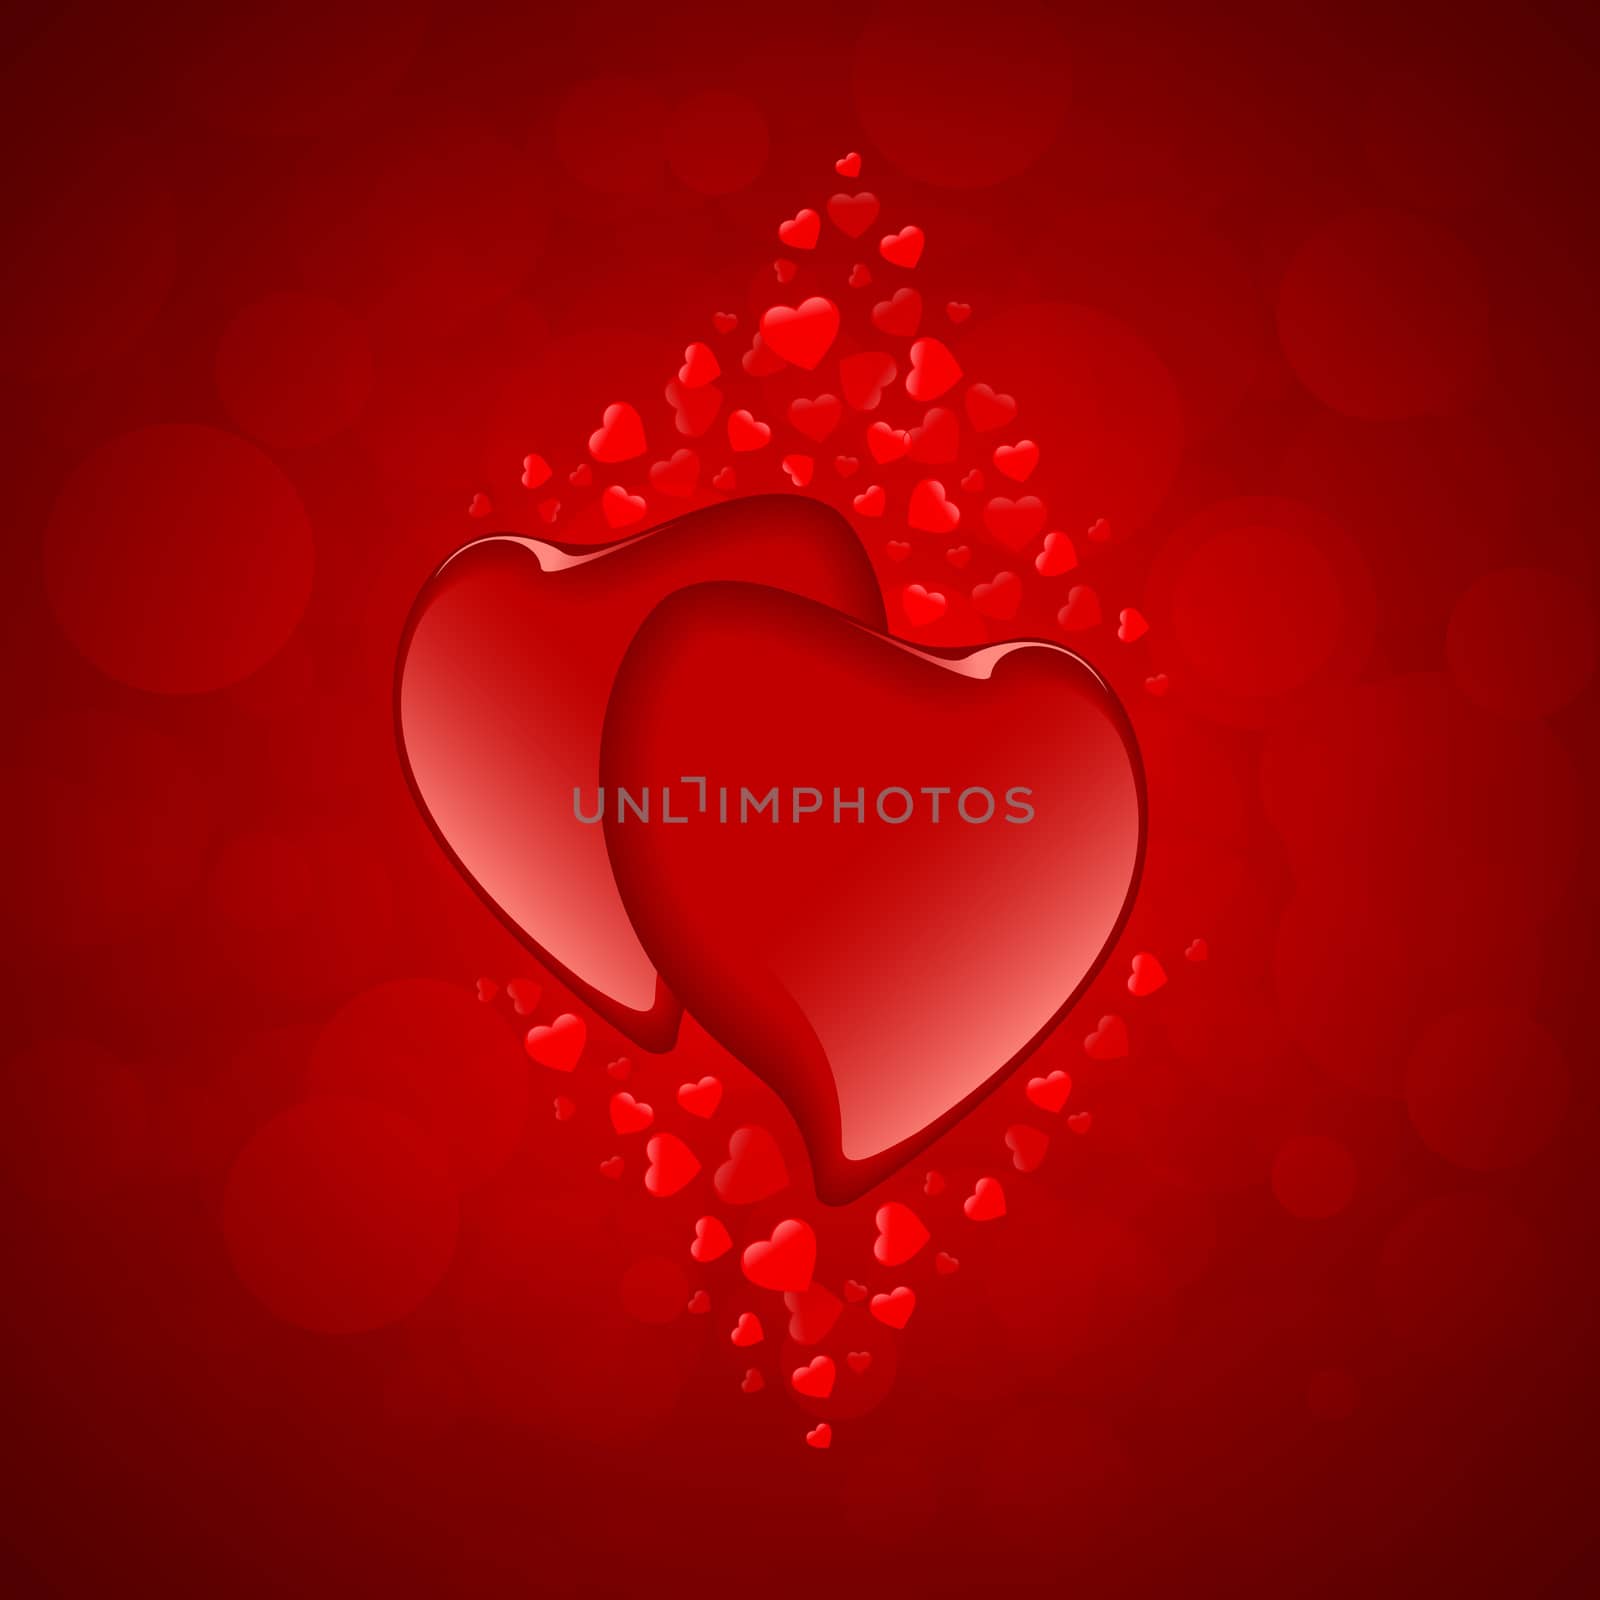 Two Red Hearts Valentine's Day Card Background